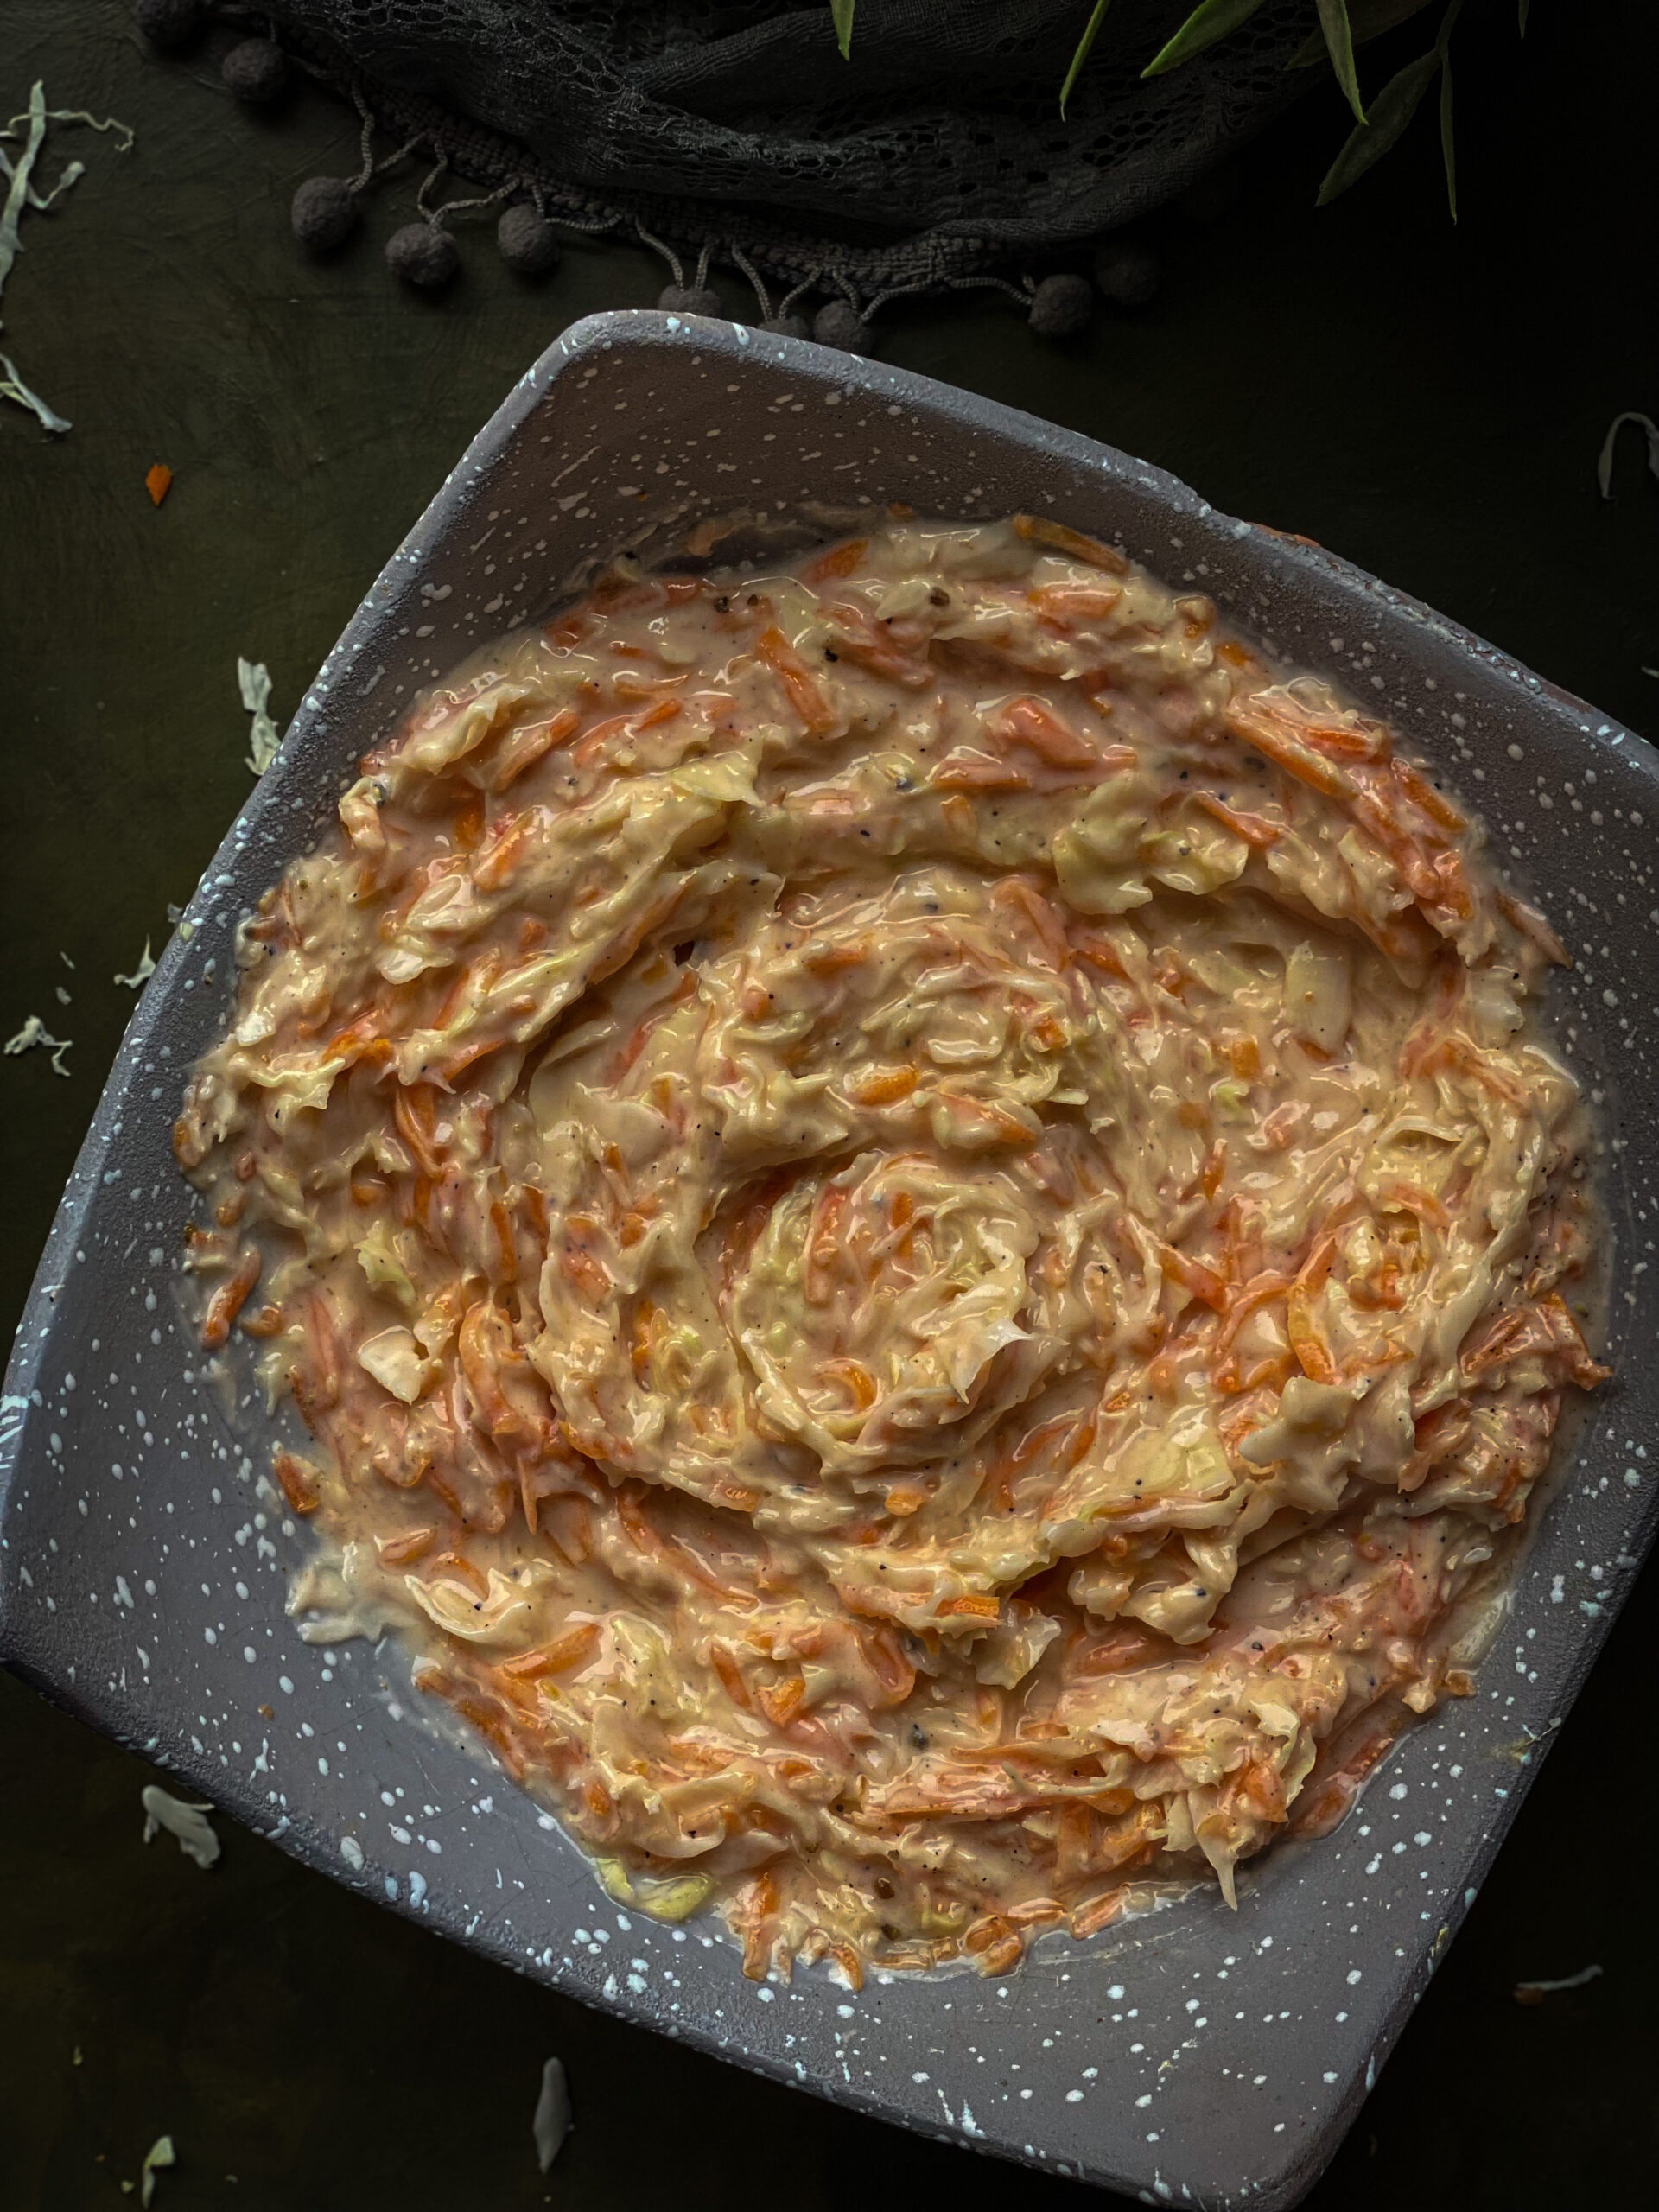 High Protein Coleslaw (Mayo-free)